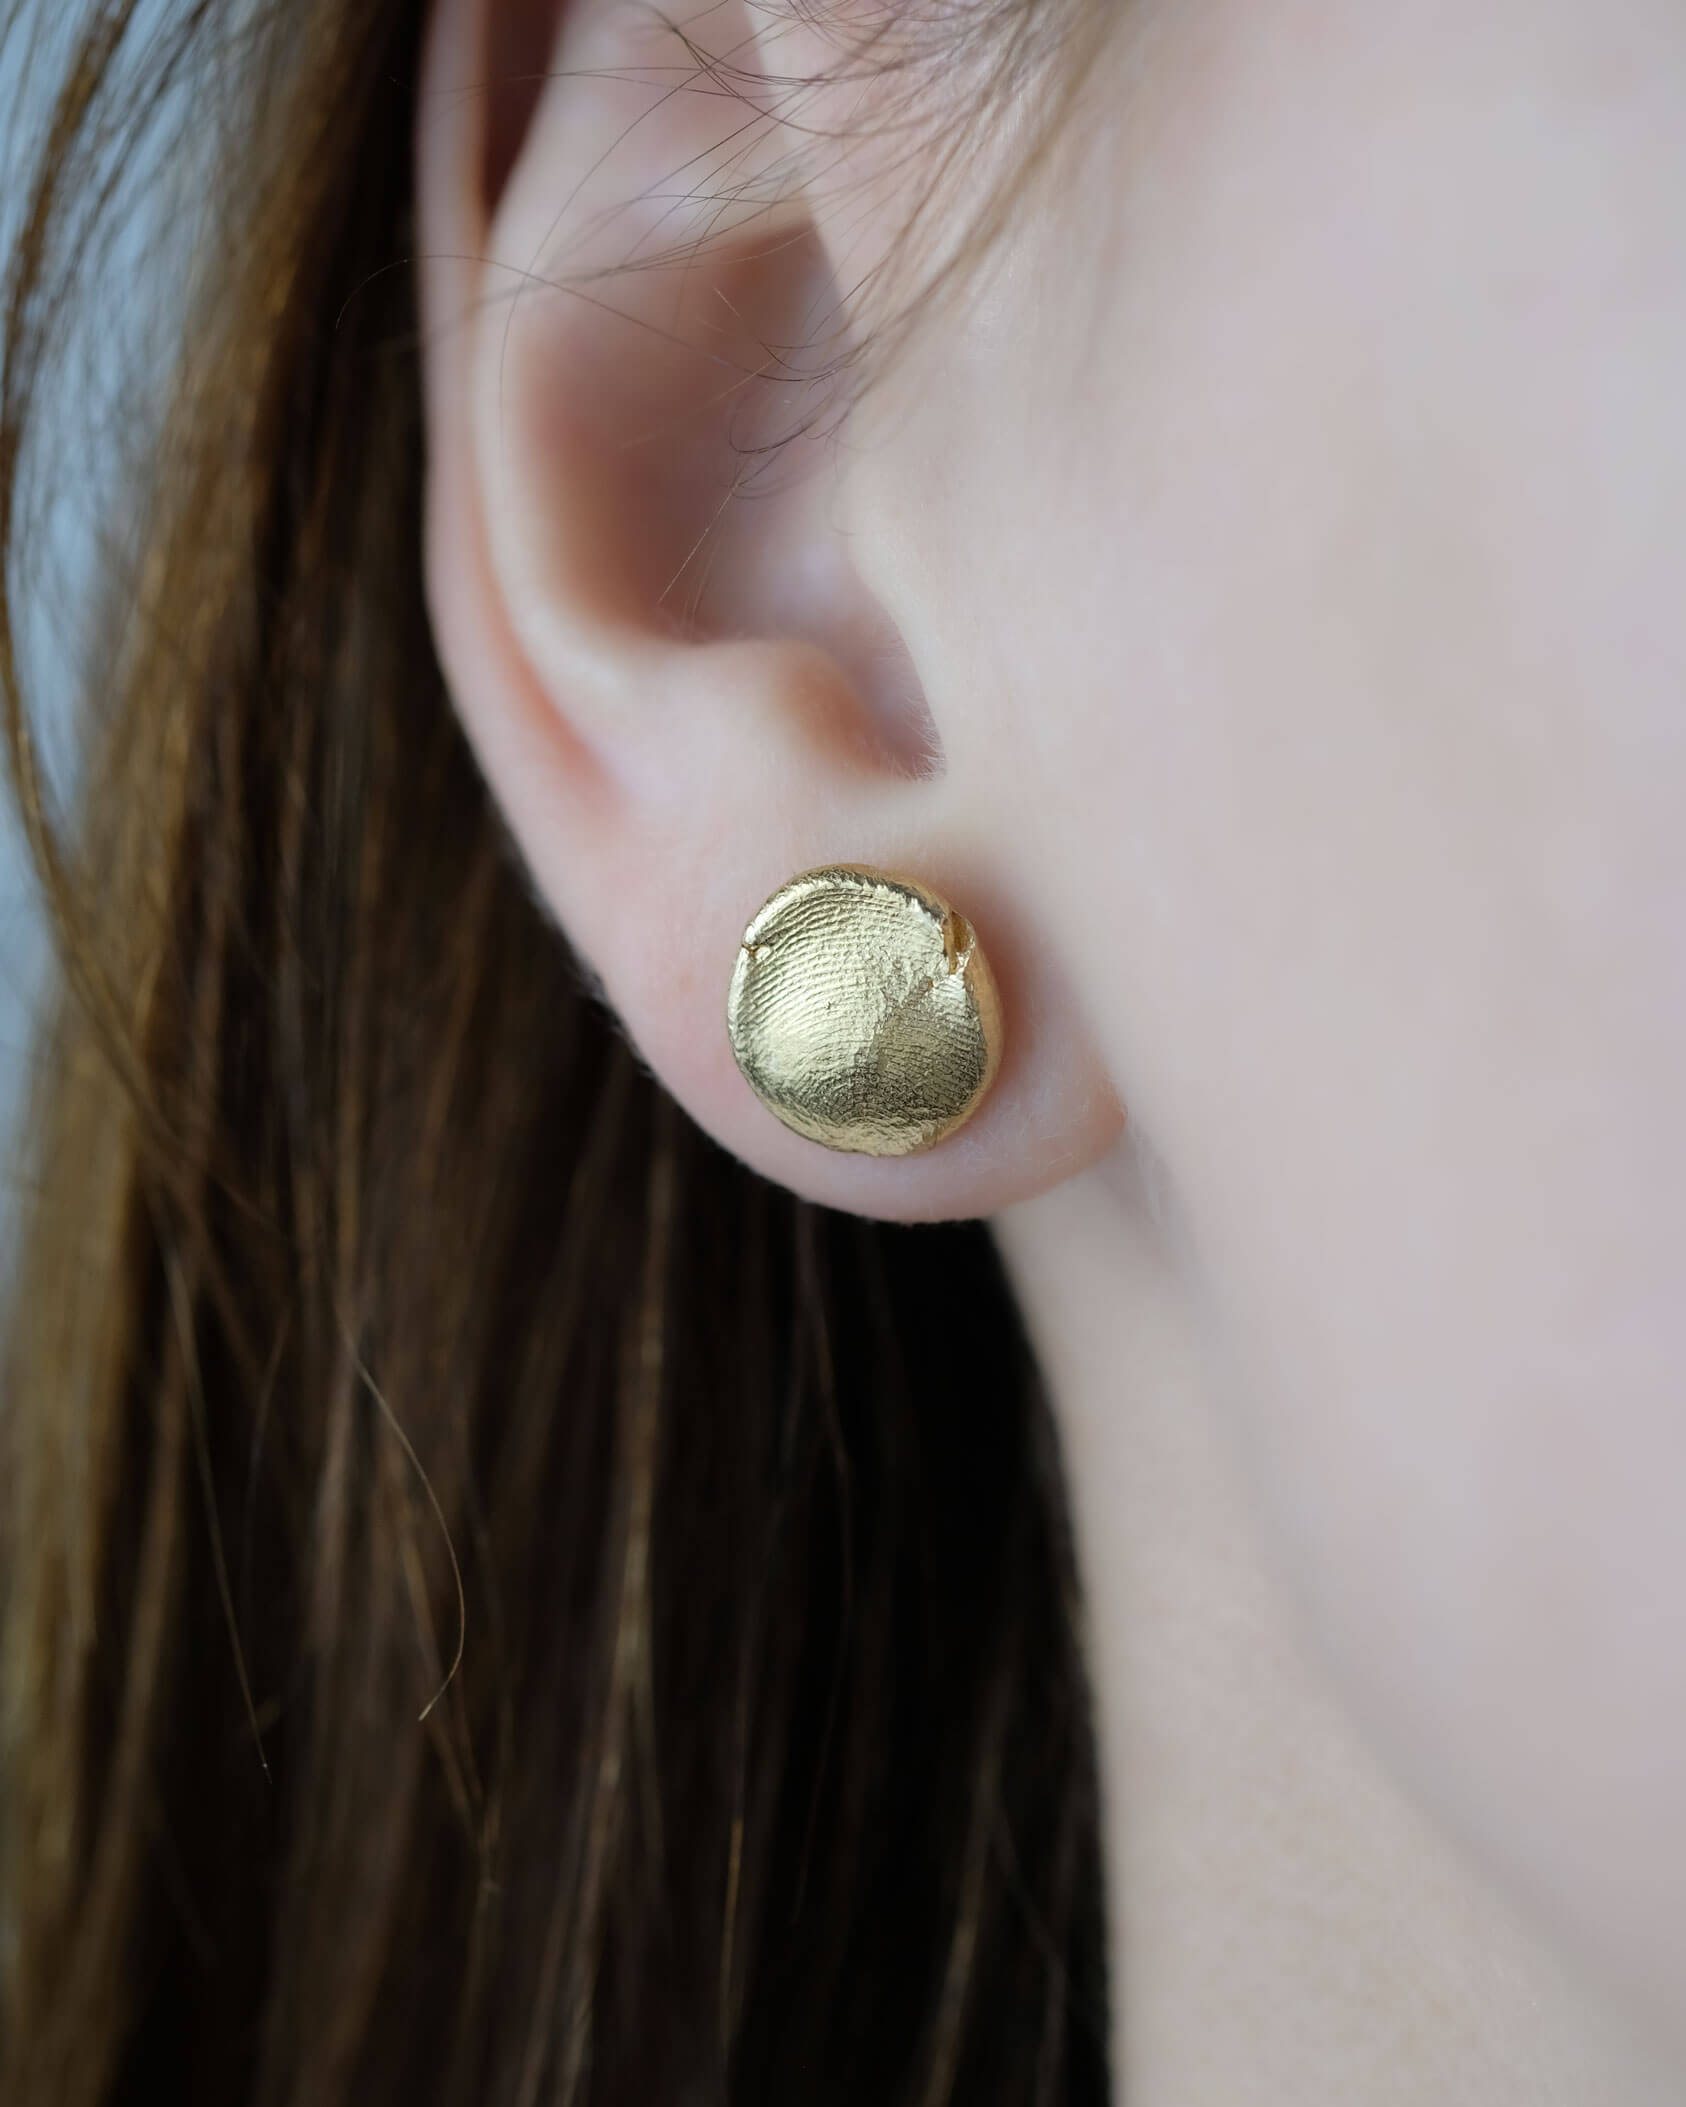 Baby Fingerprints Earrings in solid 14k or 18k gold by Matanai Jewelry